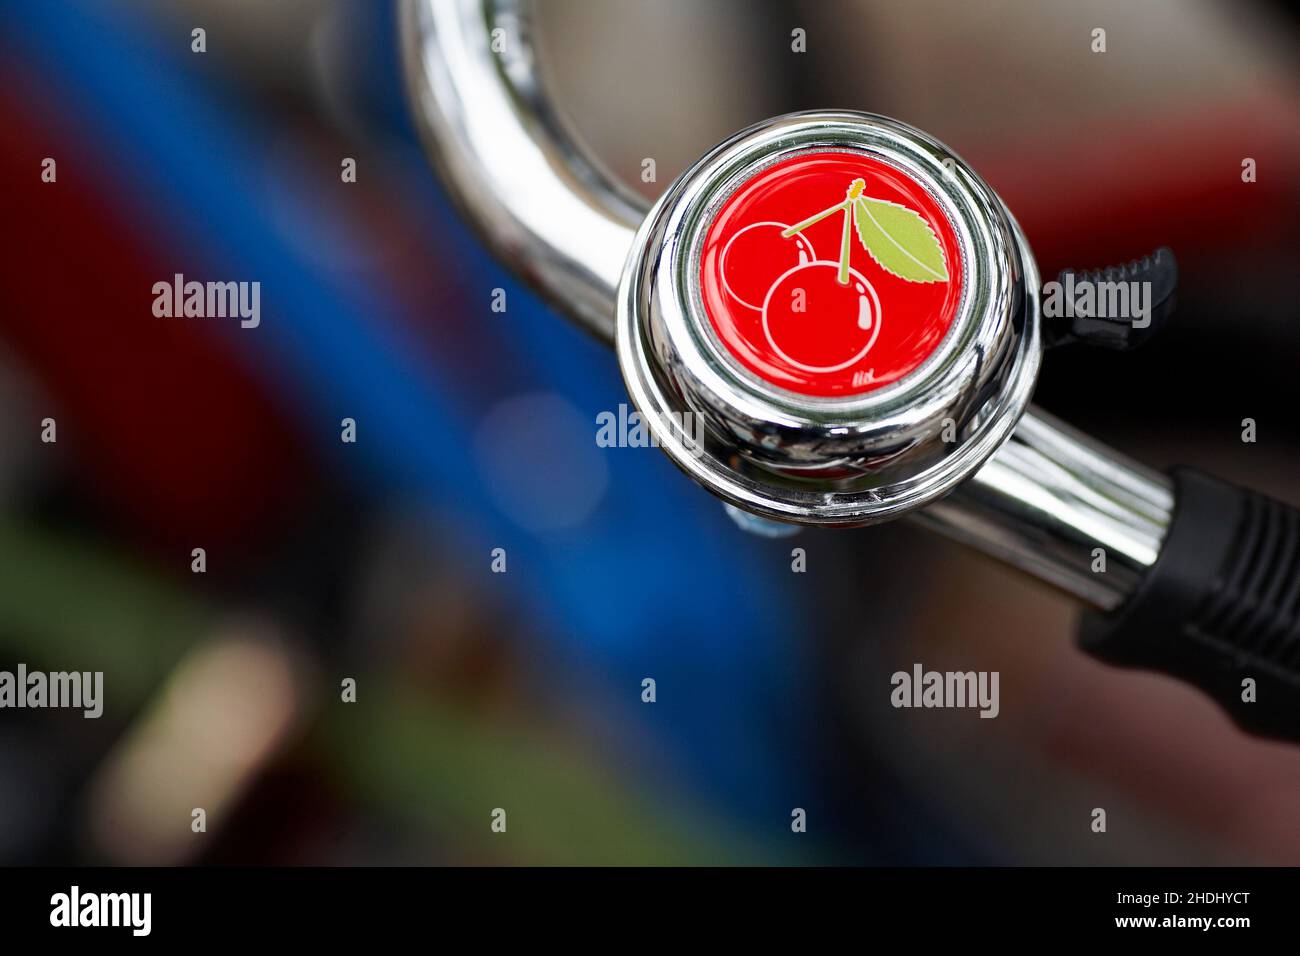 Cherry bicycle bell .Bicycle handlebar with bell with blurred background. Stock Photo